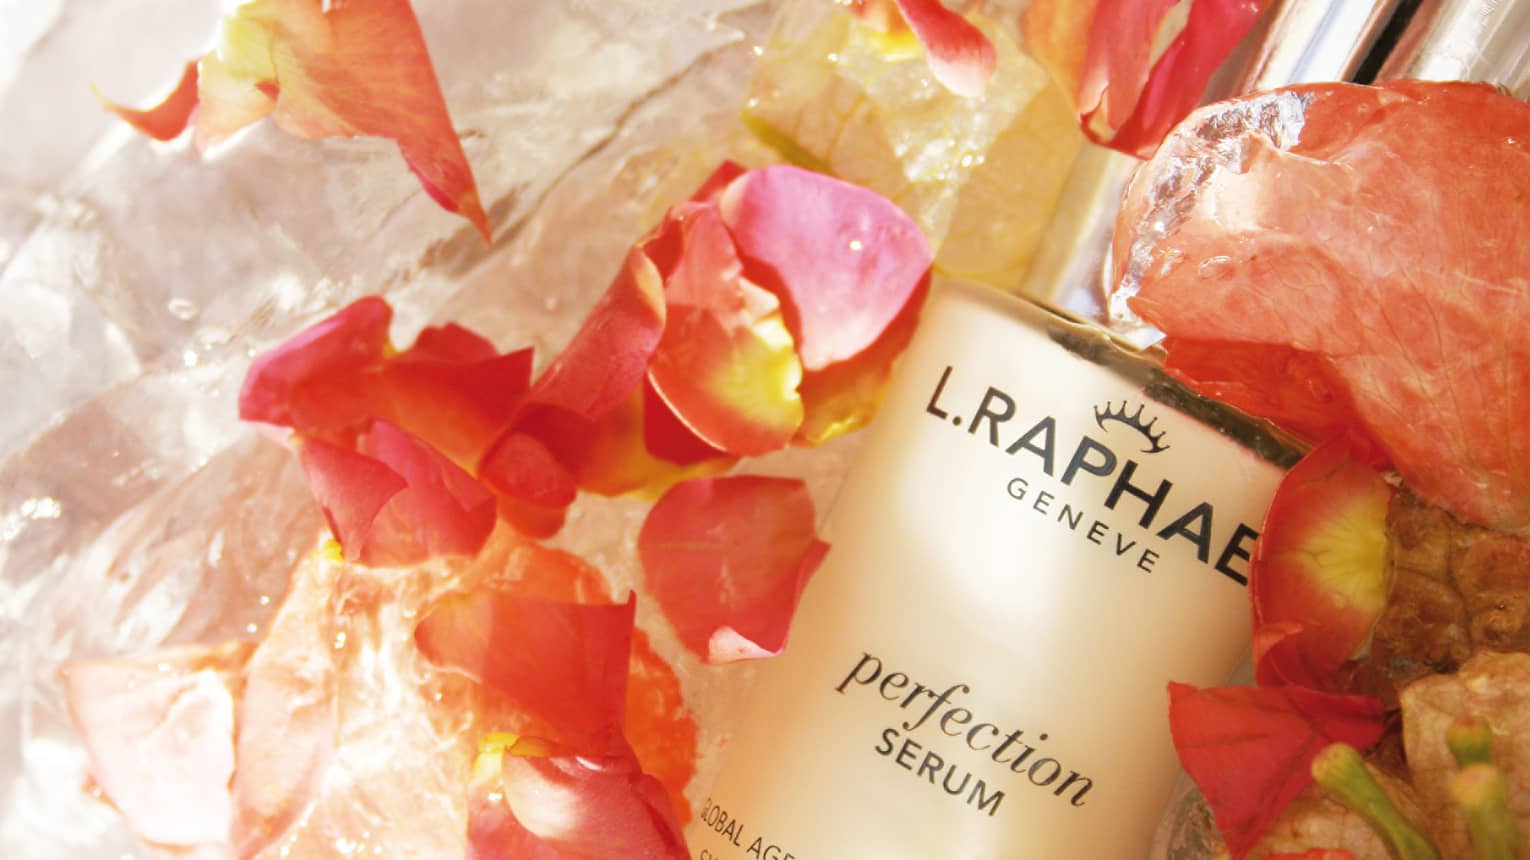 Close-up of bottle of L.RAPHAEL facial serum surrounded by fresh pink flower petals